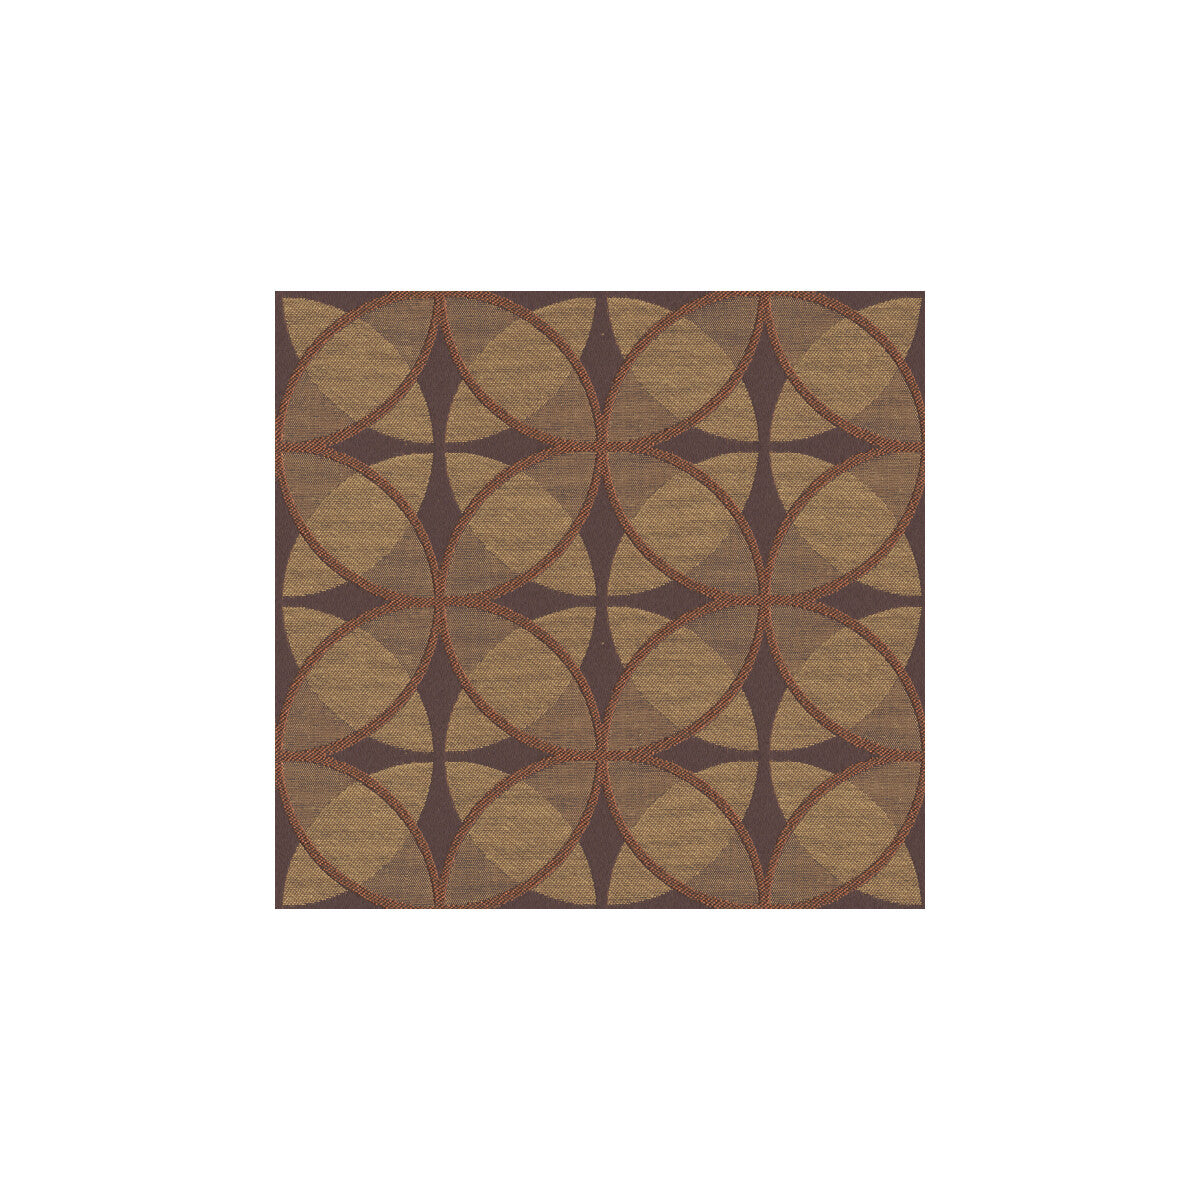 Clockwork fabric in copper color - pattern 31526.6.0 - by Kravet Contract in the Contract Gis collection